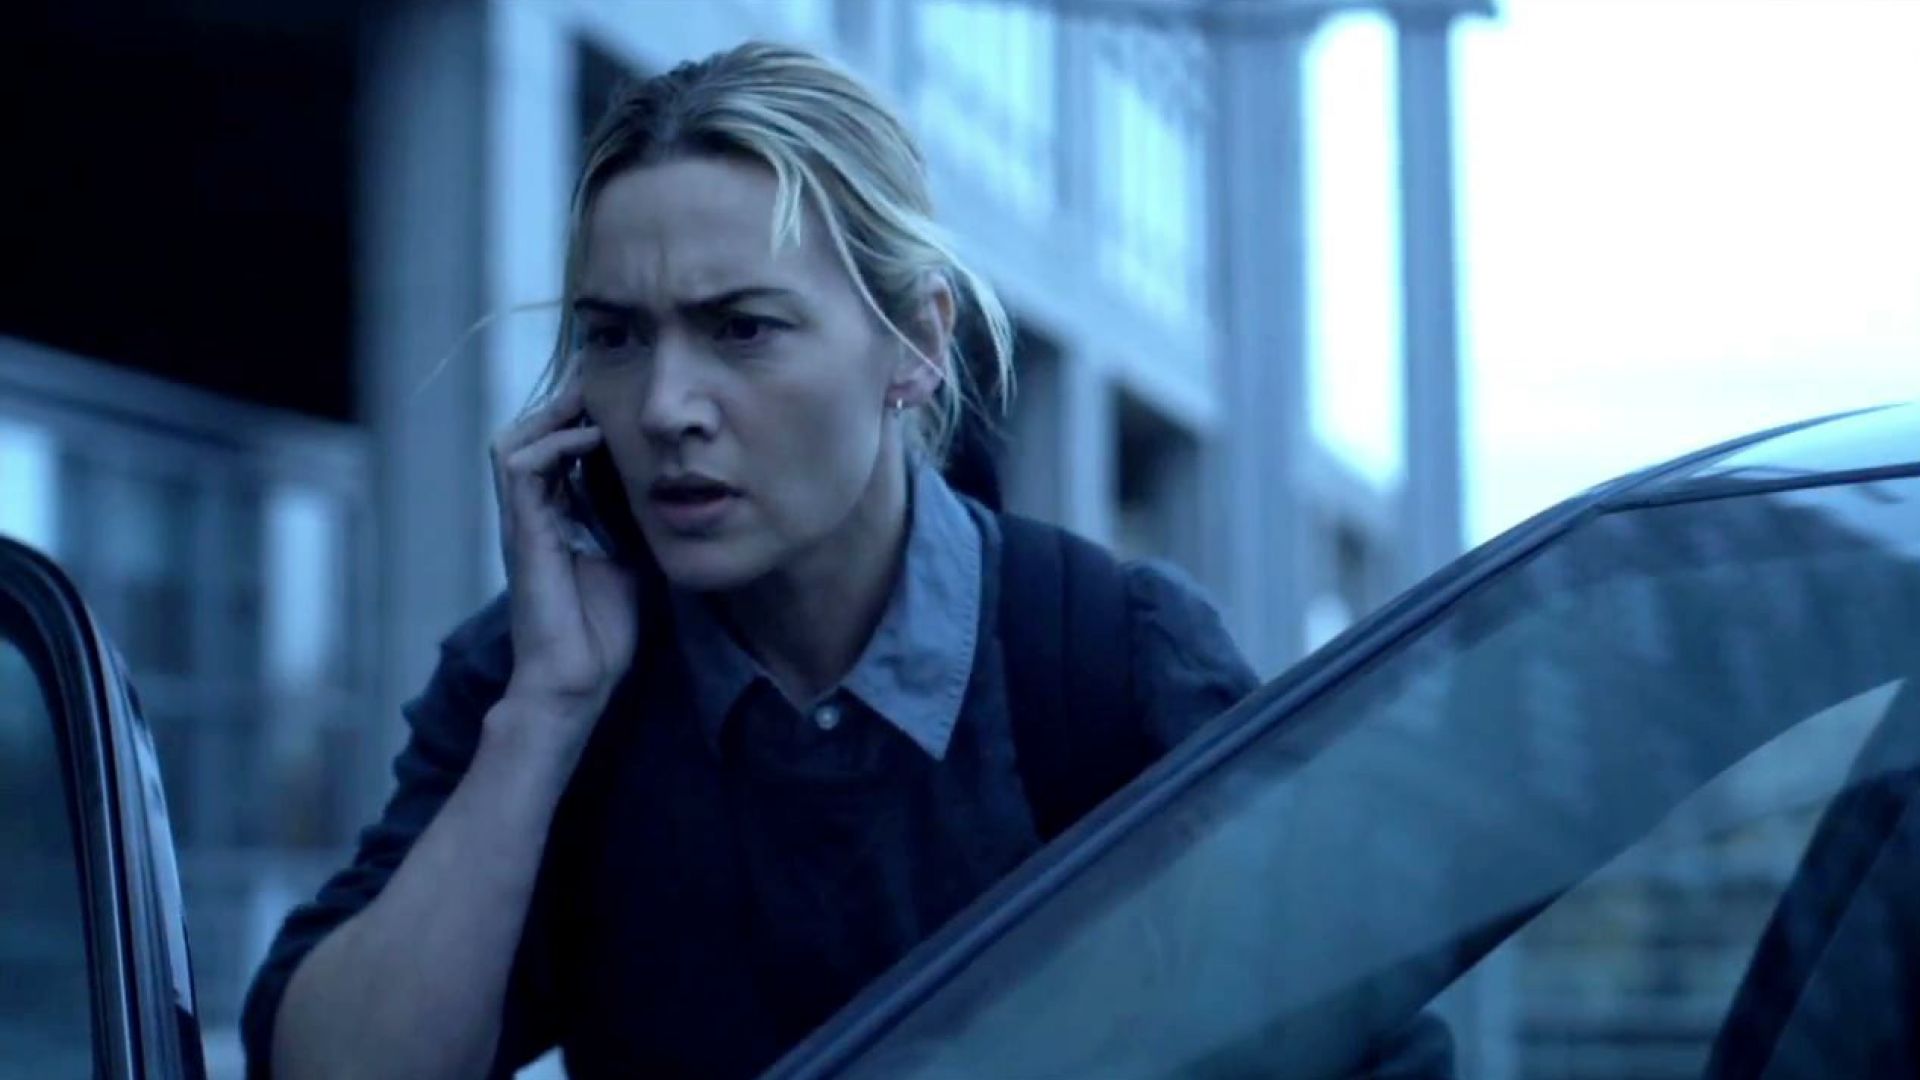 Kate Winslet tracks down the man infected on the bus in Contagion